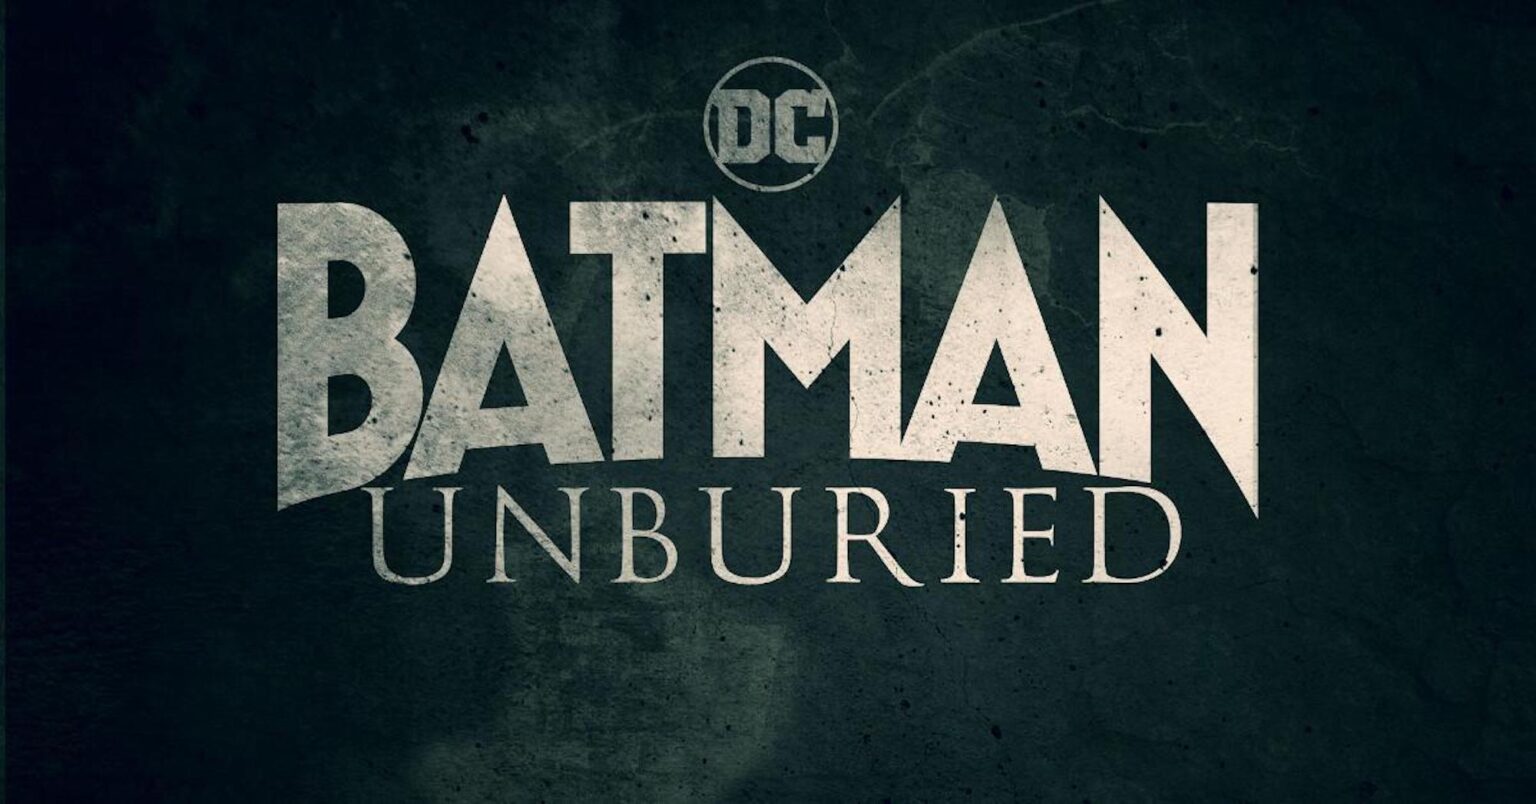 The upcoming DC-Spotify collab podcast 'Batman Unburied' has announced more cast. Who is playing the famous Batman villain The Riddler?